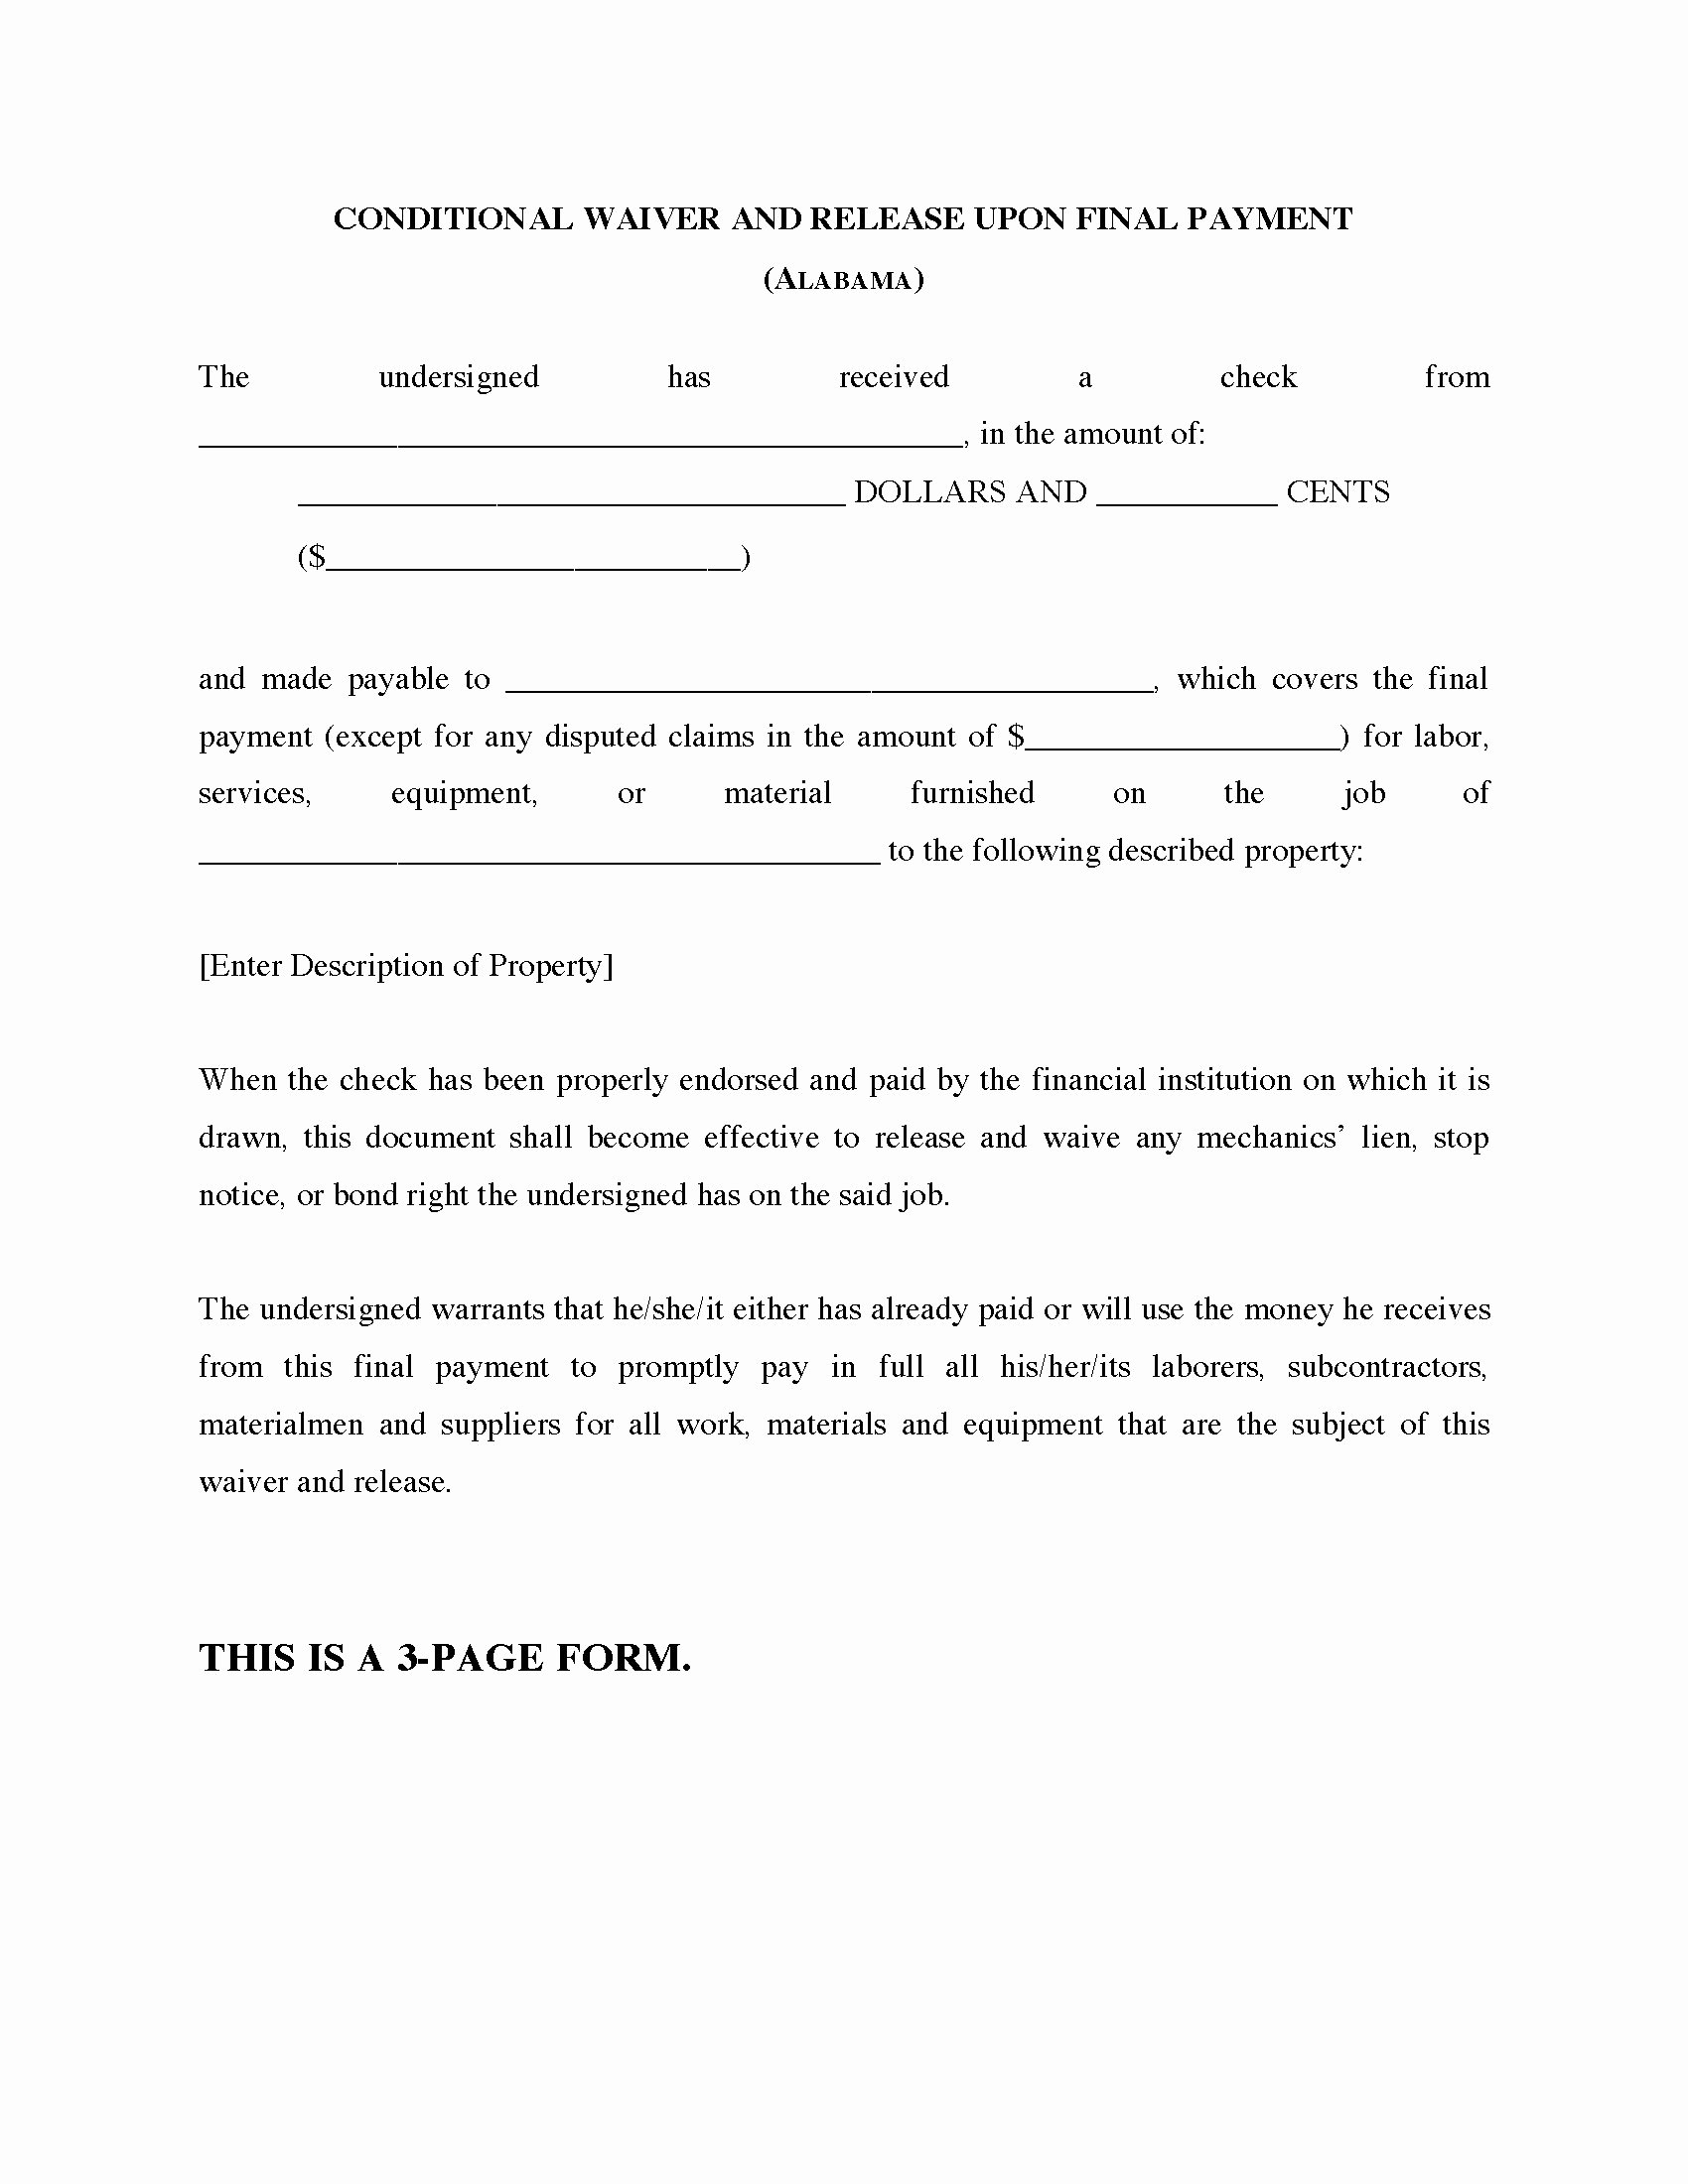 Final Lien Waiver Template Lovely Alabama Conditional Waiver and Release Of Lien Upon Final